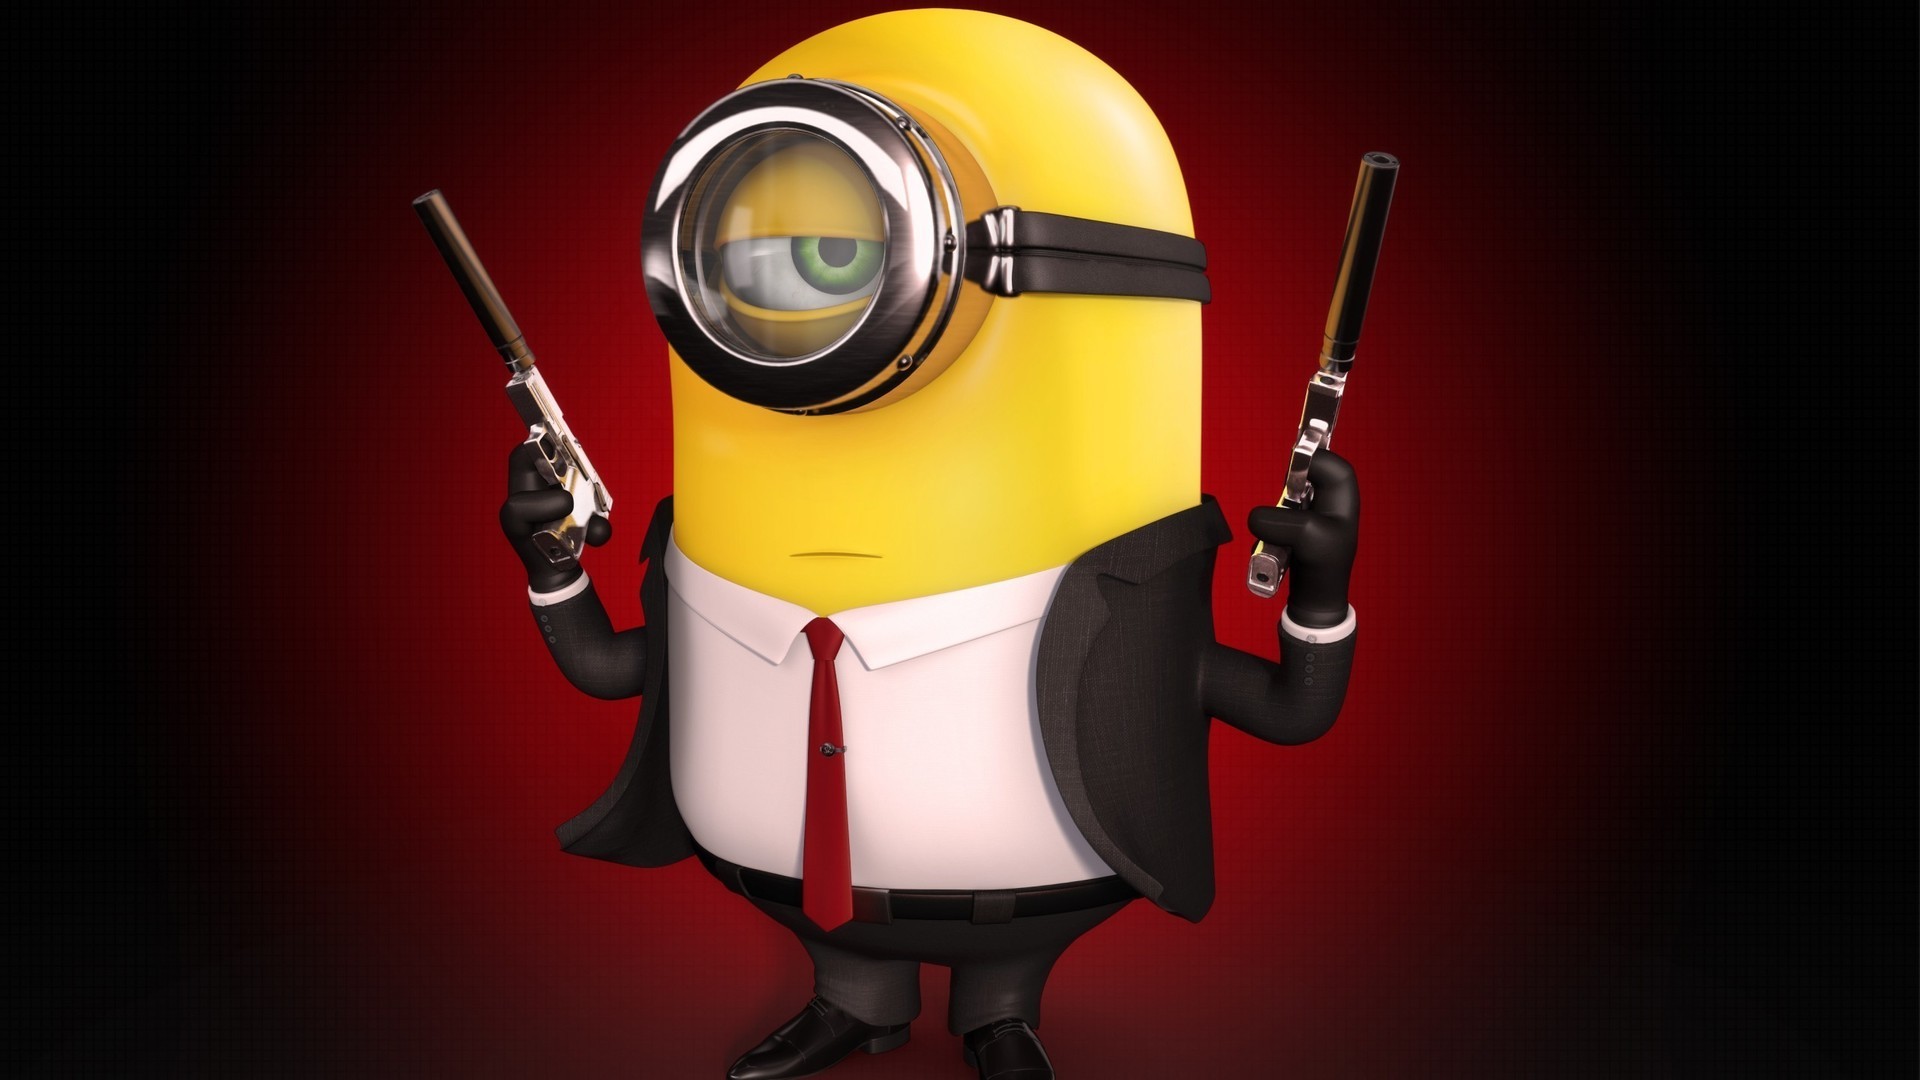 1920x1080 Minions Hd Wallpapers - image #793085